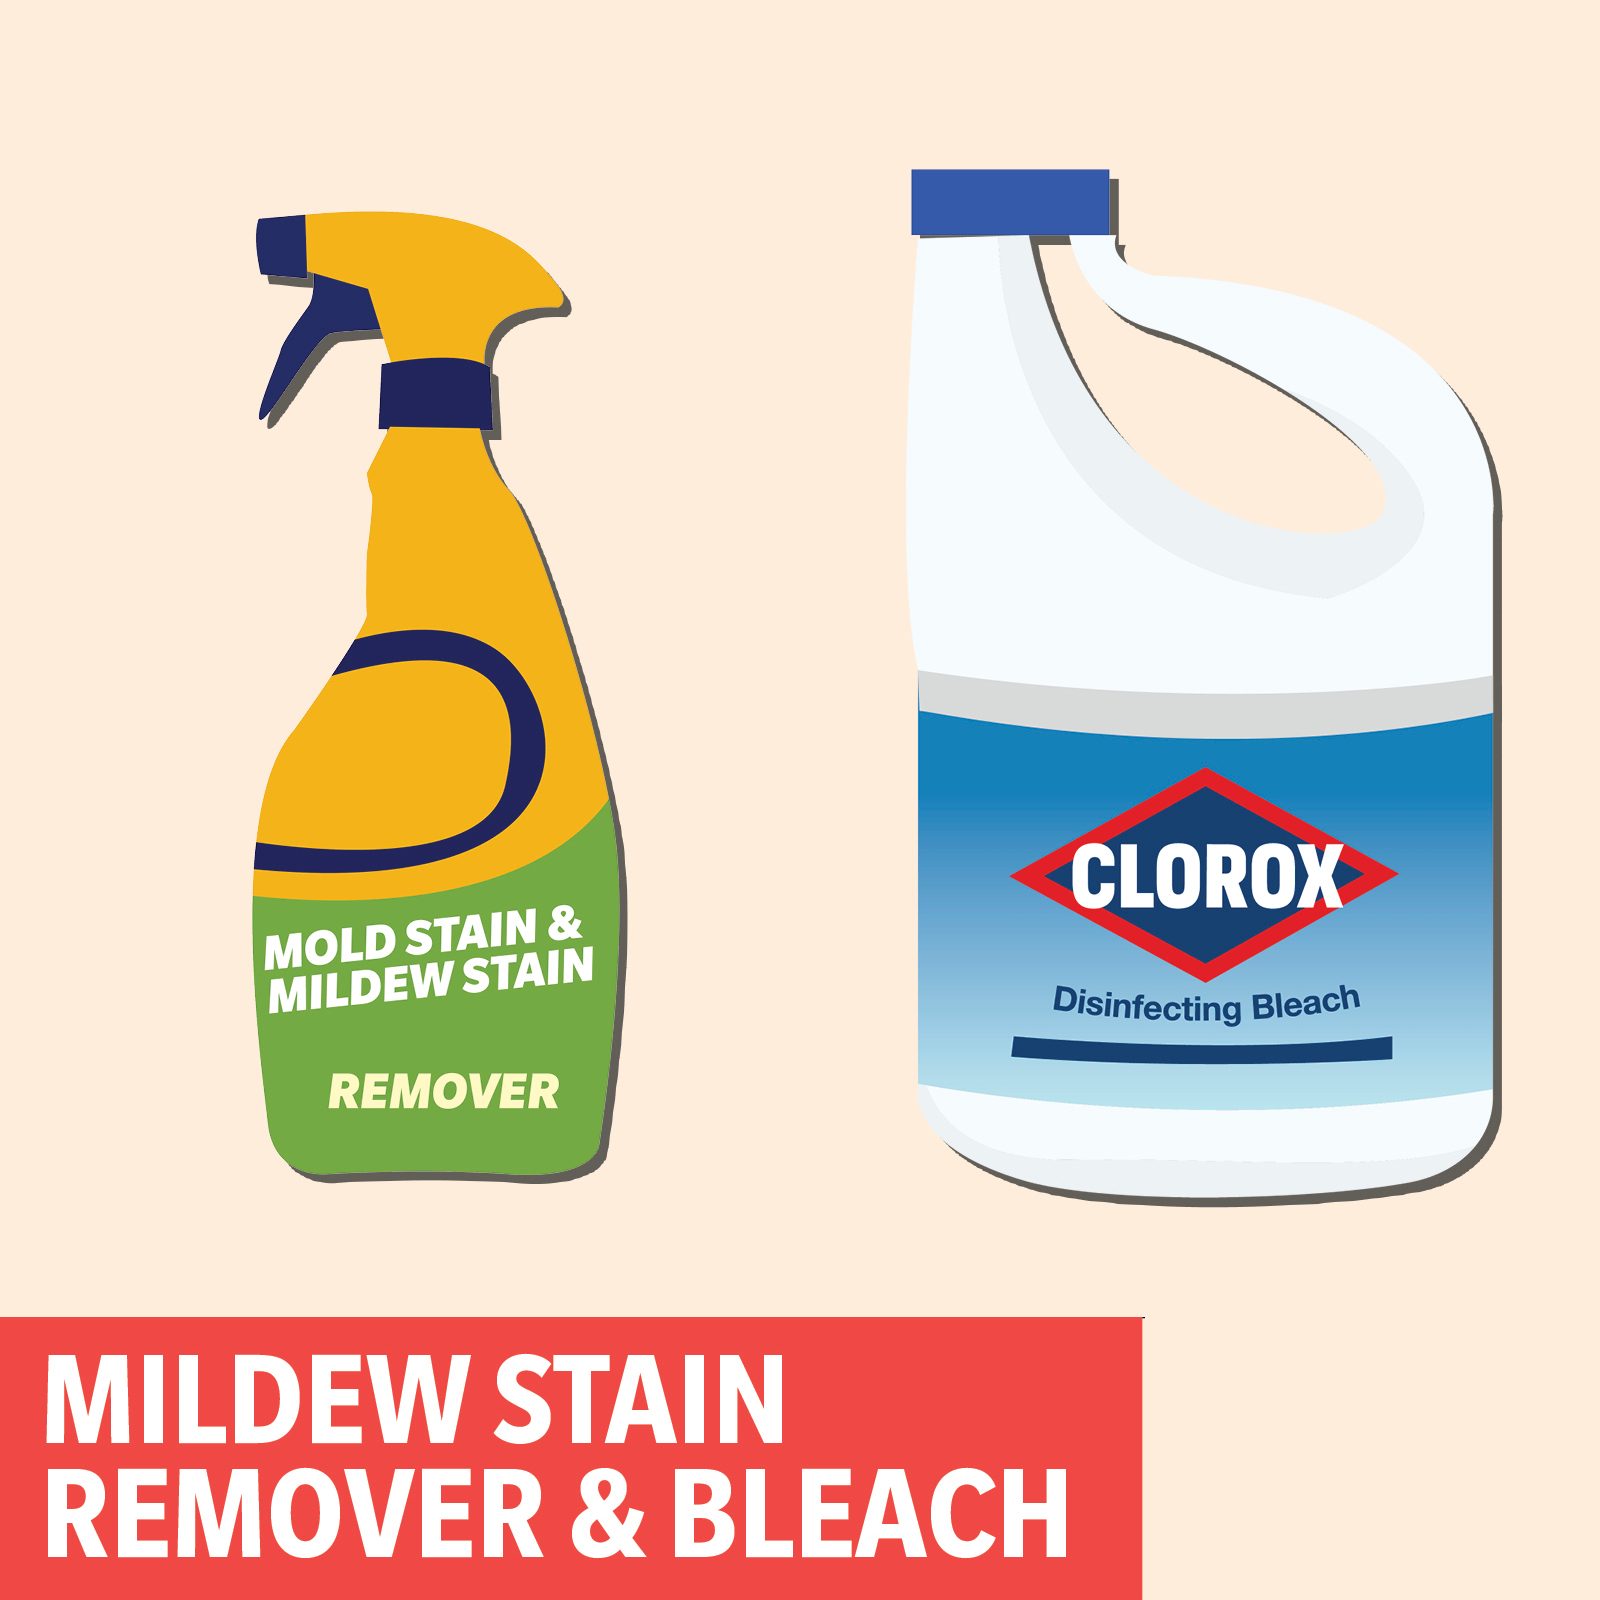 https://www.tasteofhome.com/wp-content/uploads/2018/12/Mildew-Stain-Remover-and-Bleach-copy.jpg?fit=700%2C700